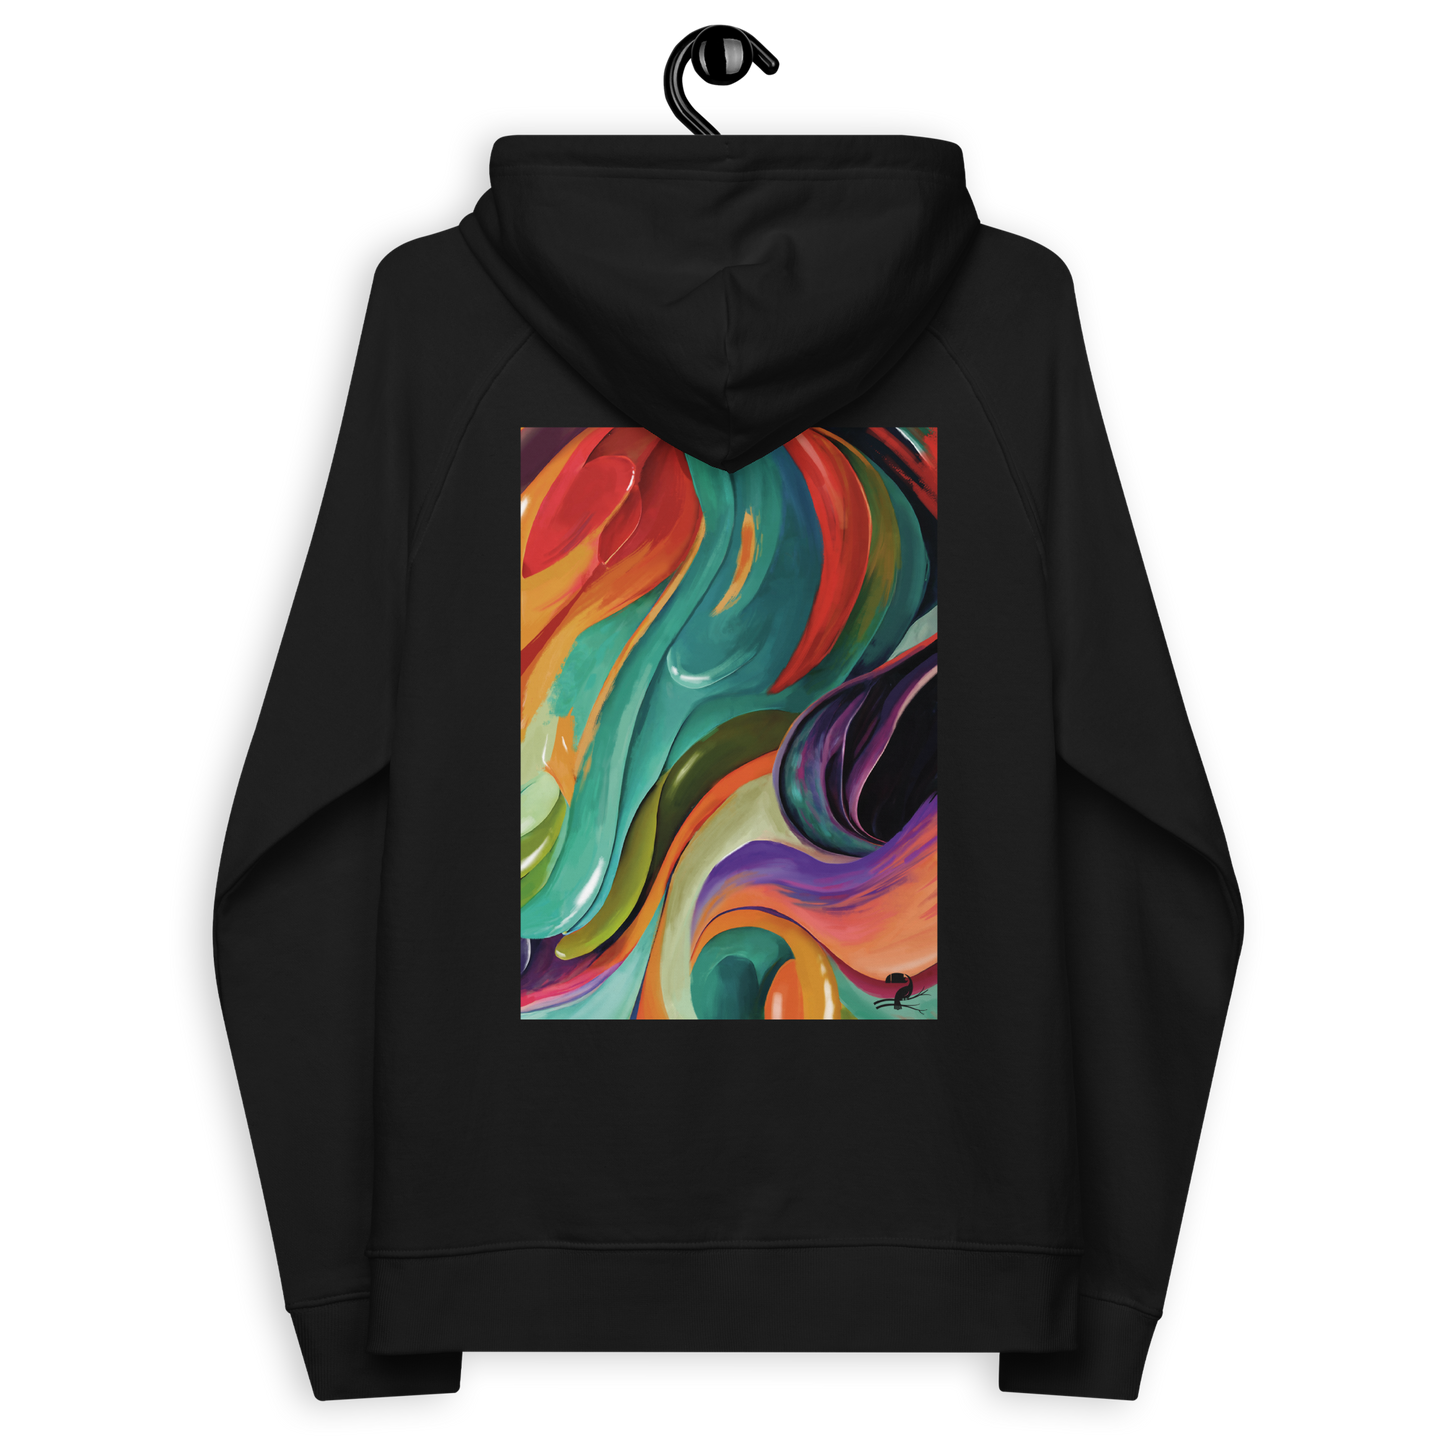 Sketches Hoodie by Jam'addict